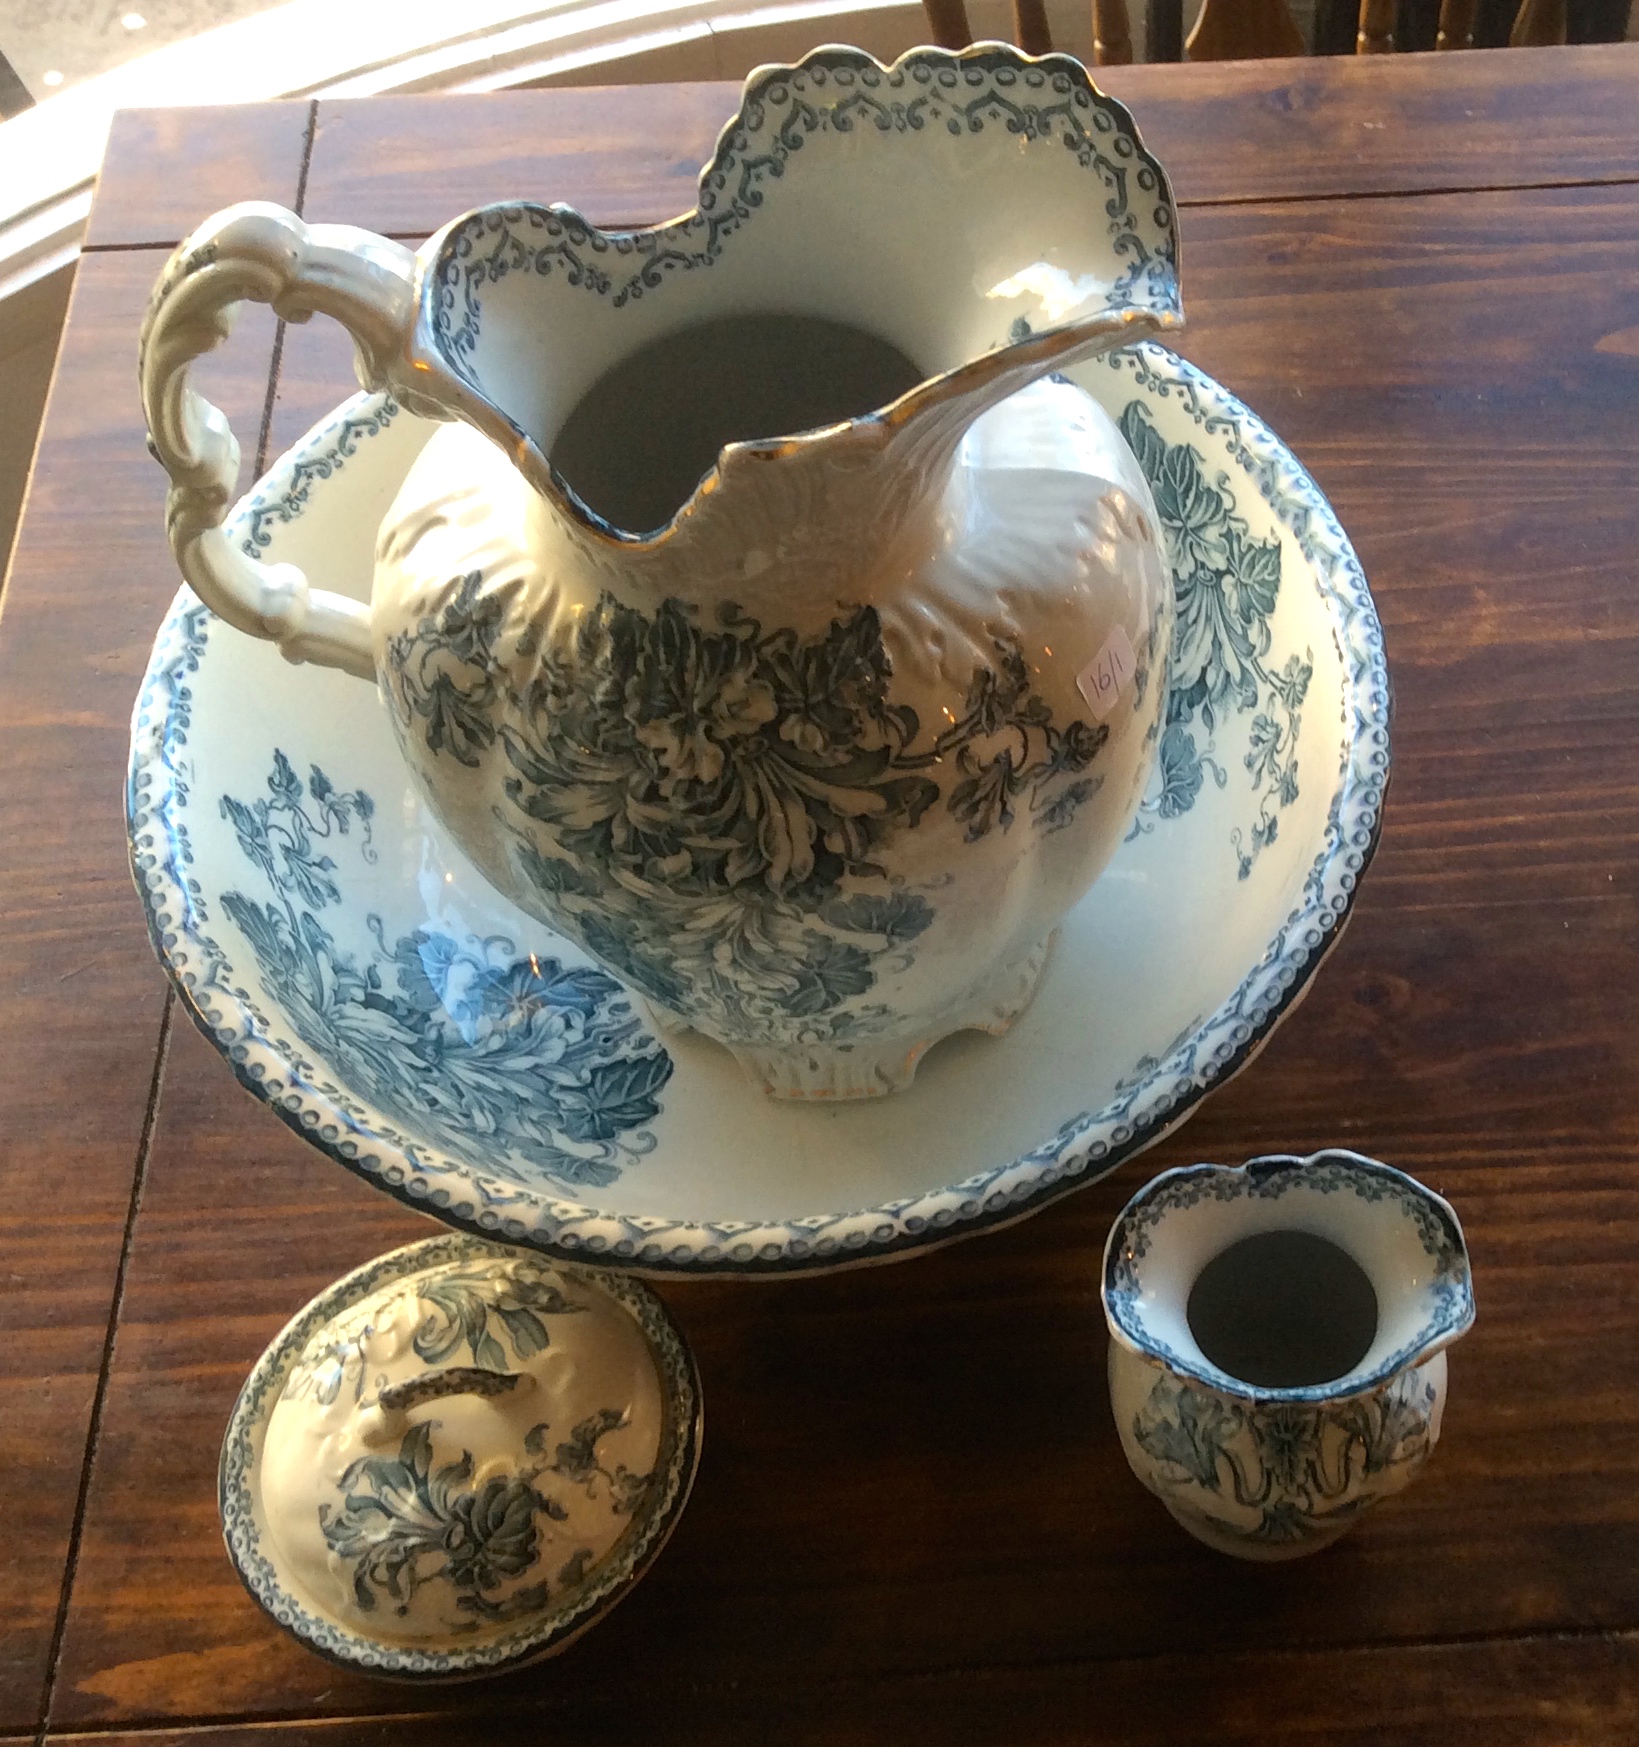 A 19thc wash bowl, jug, soap dish, and tooth holder